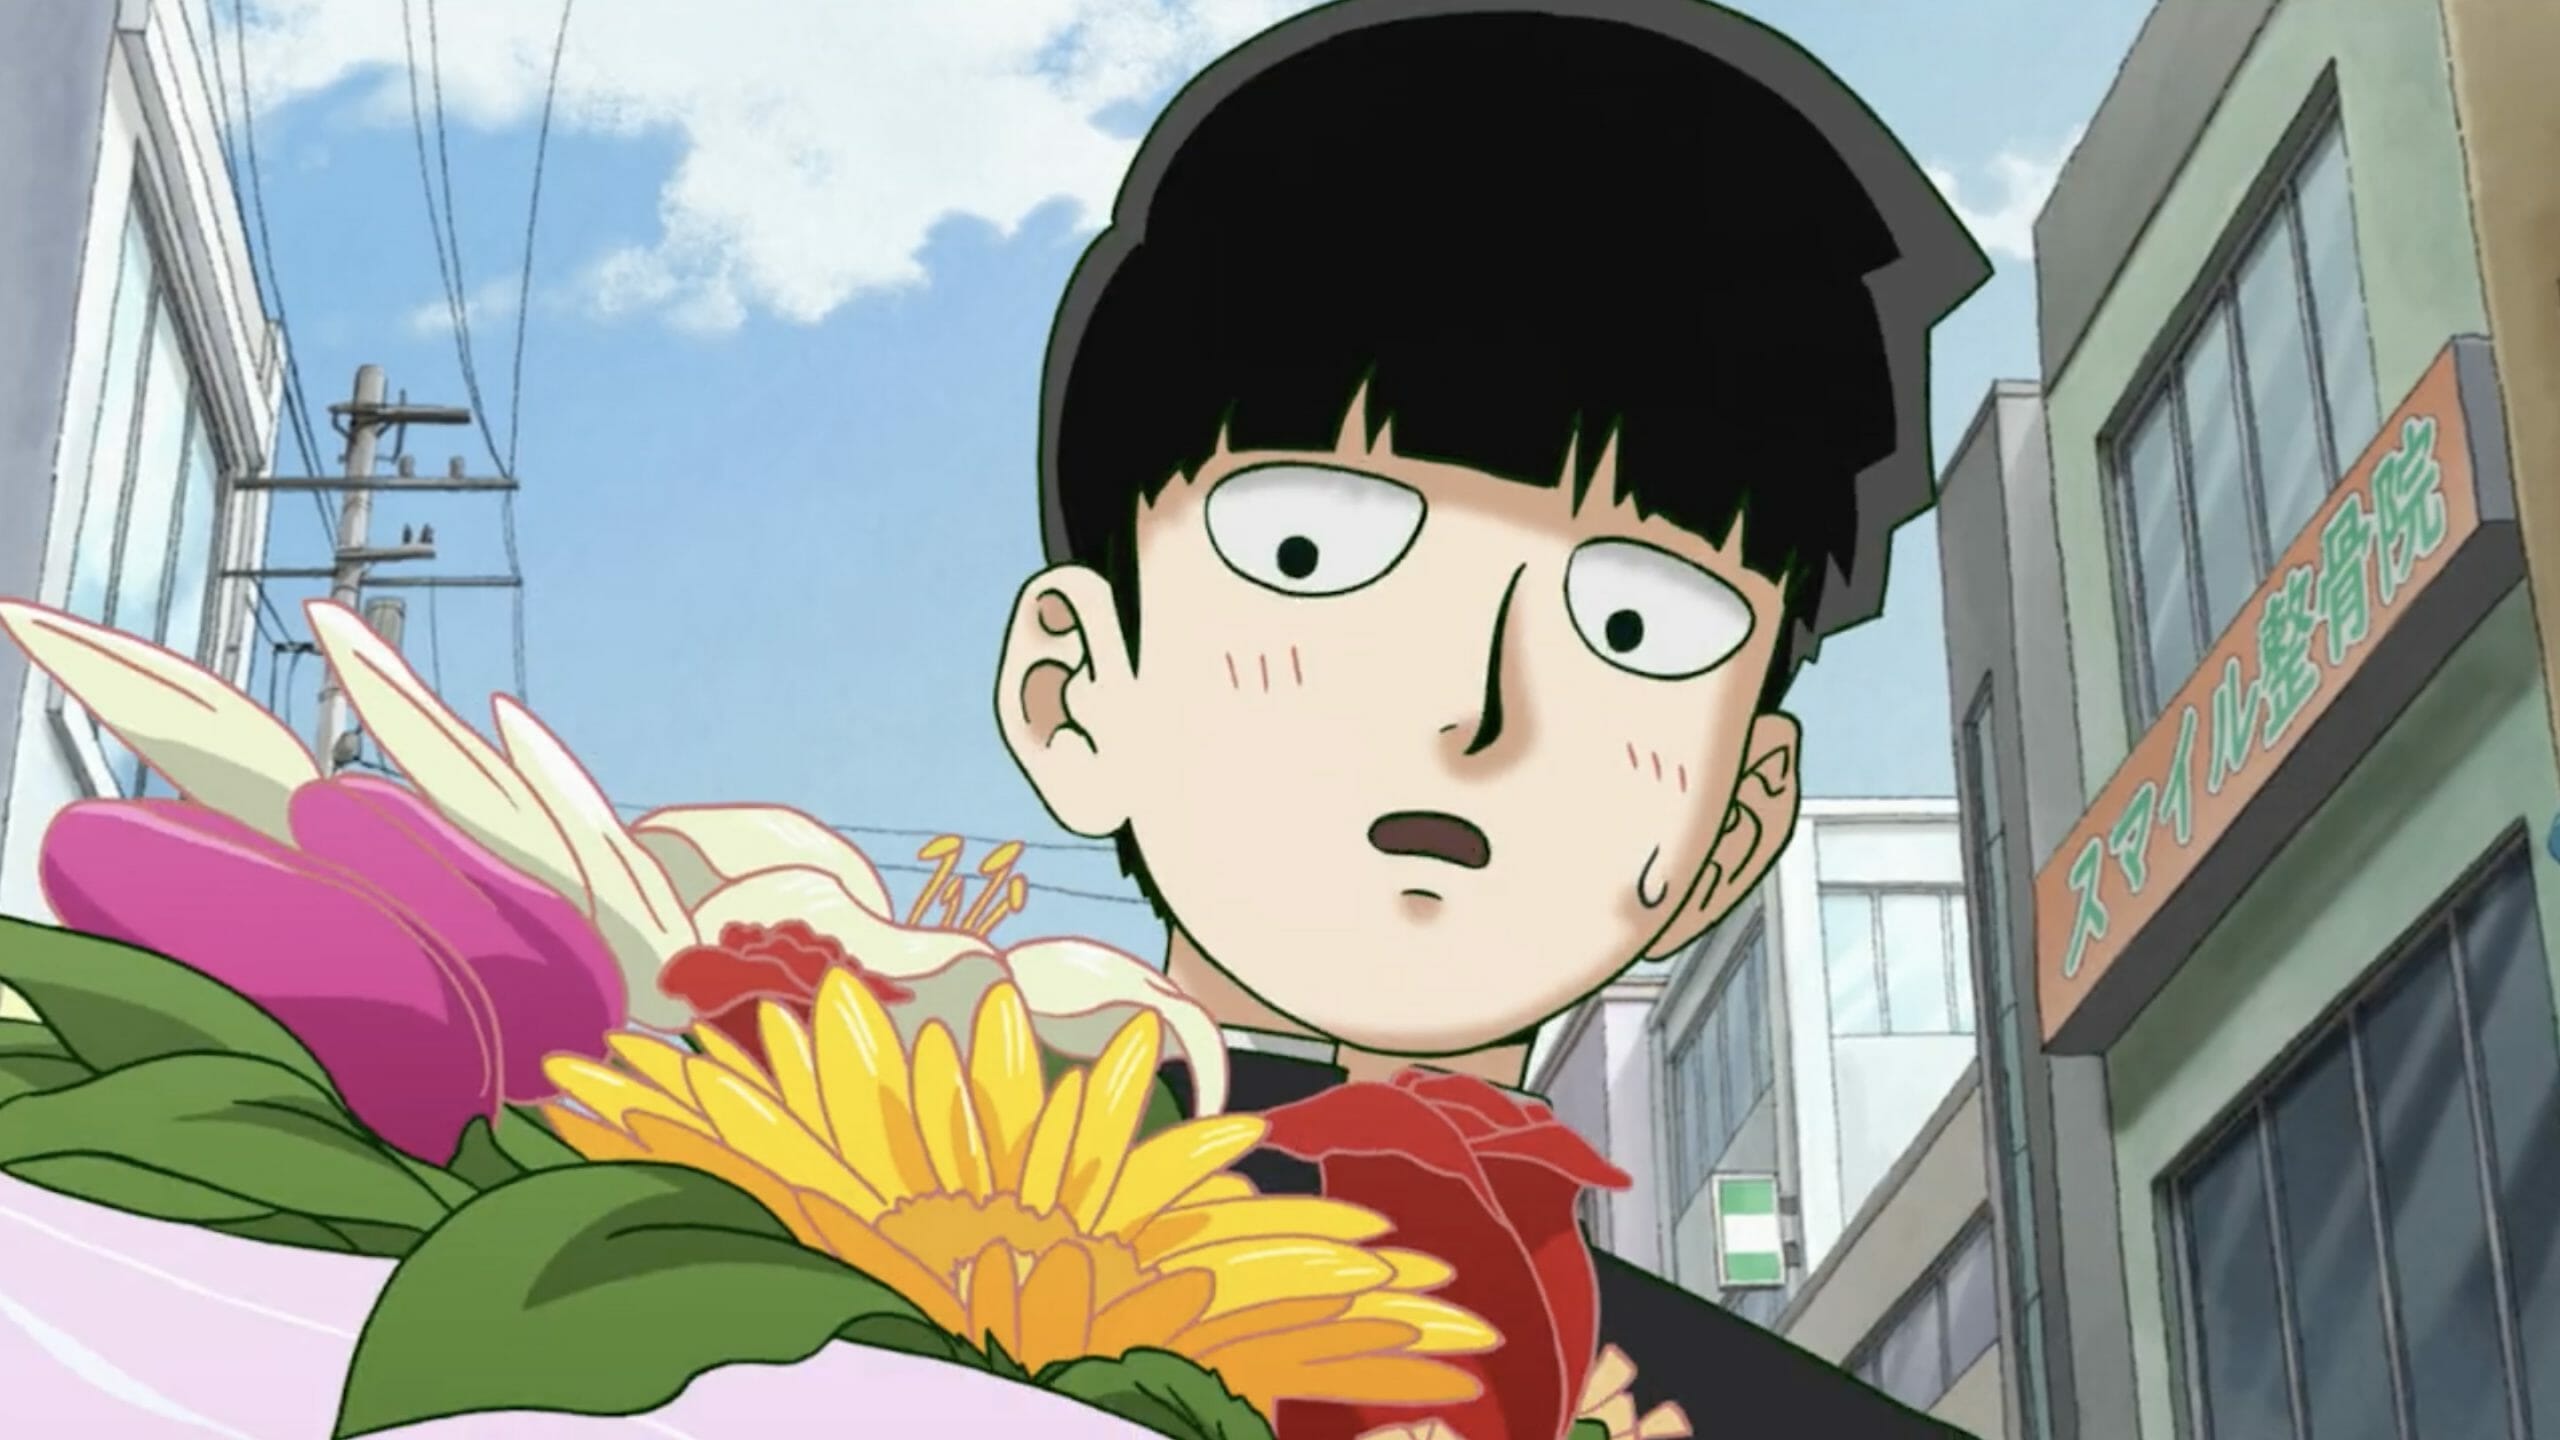 Mob Psycho 100 Archives - Lost in Anime